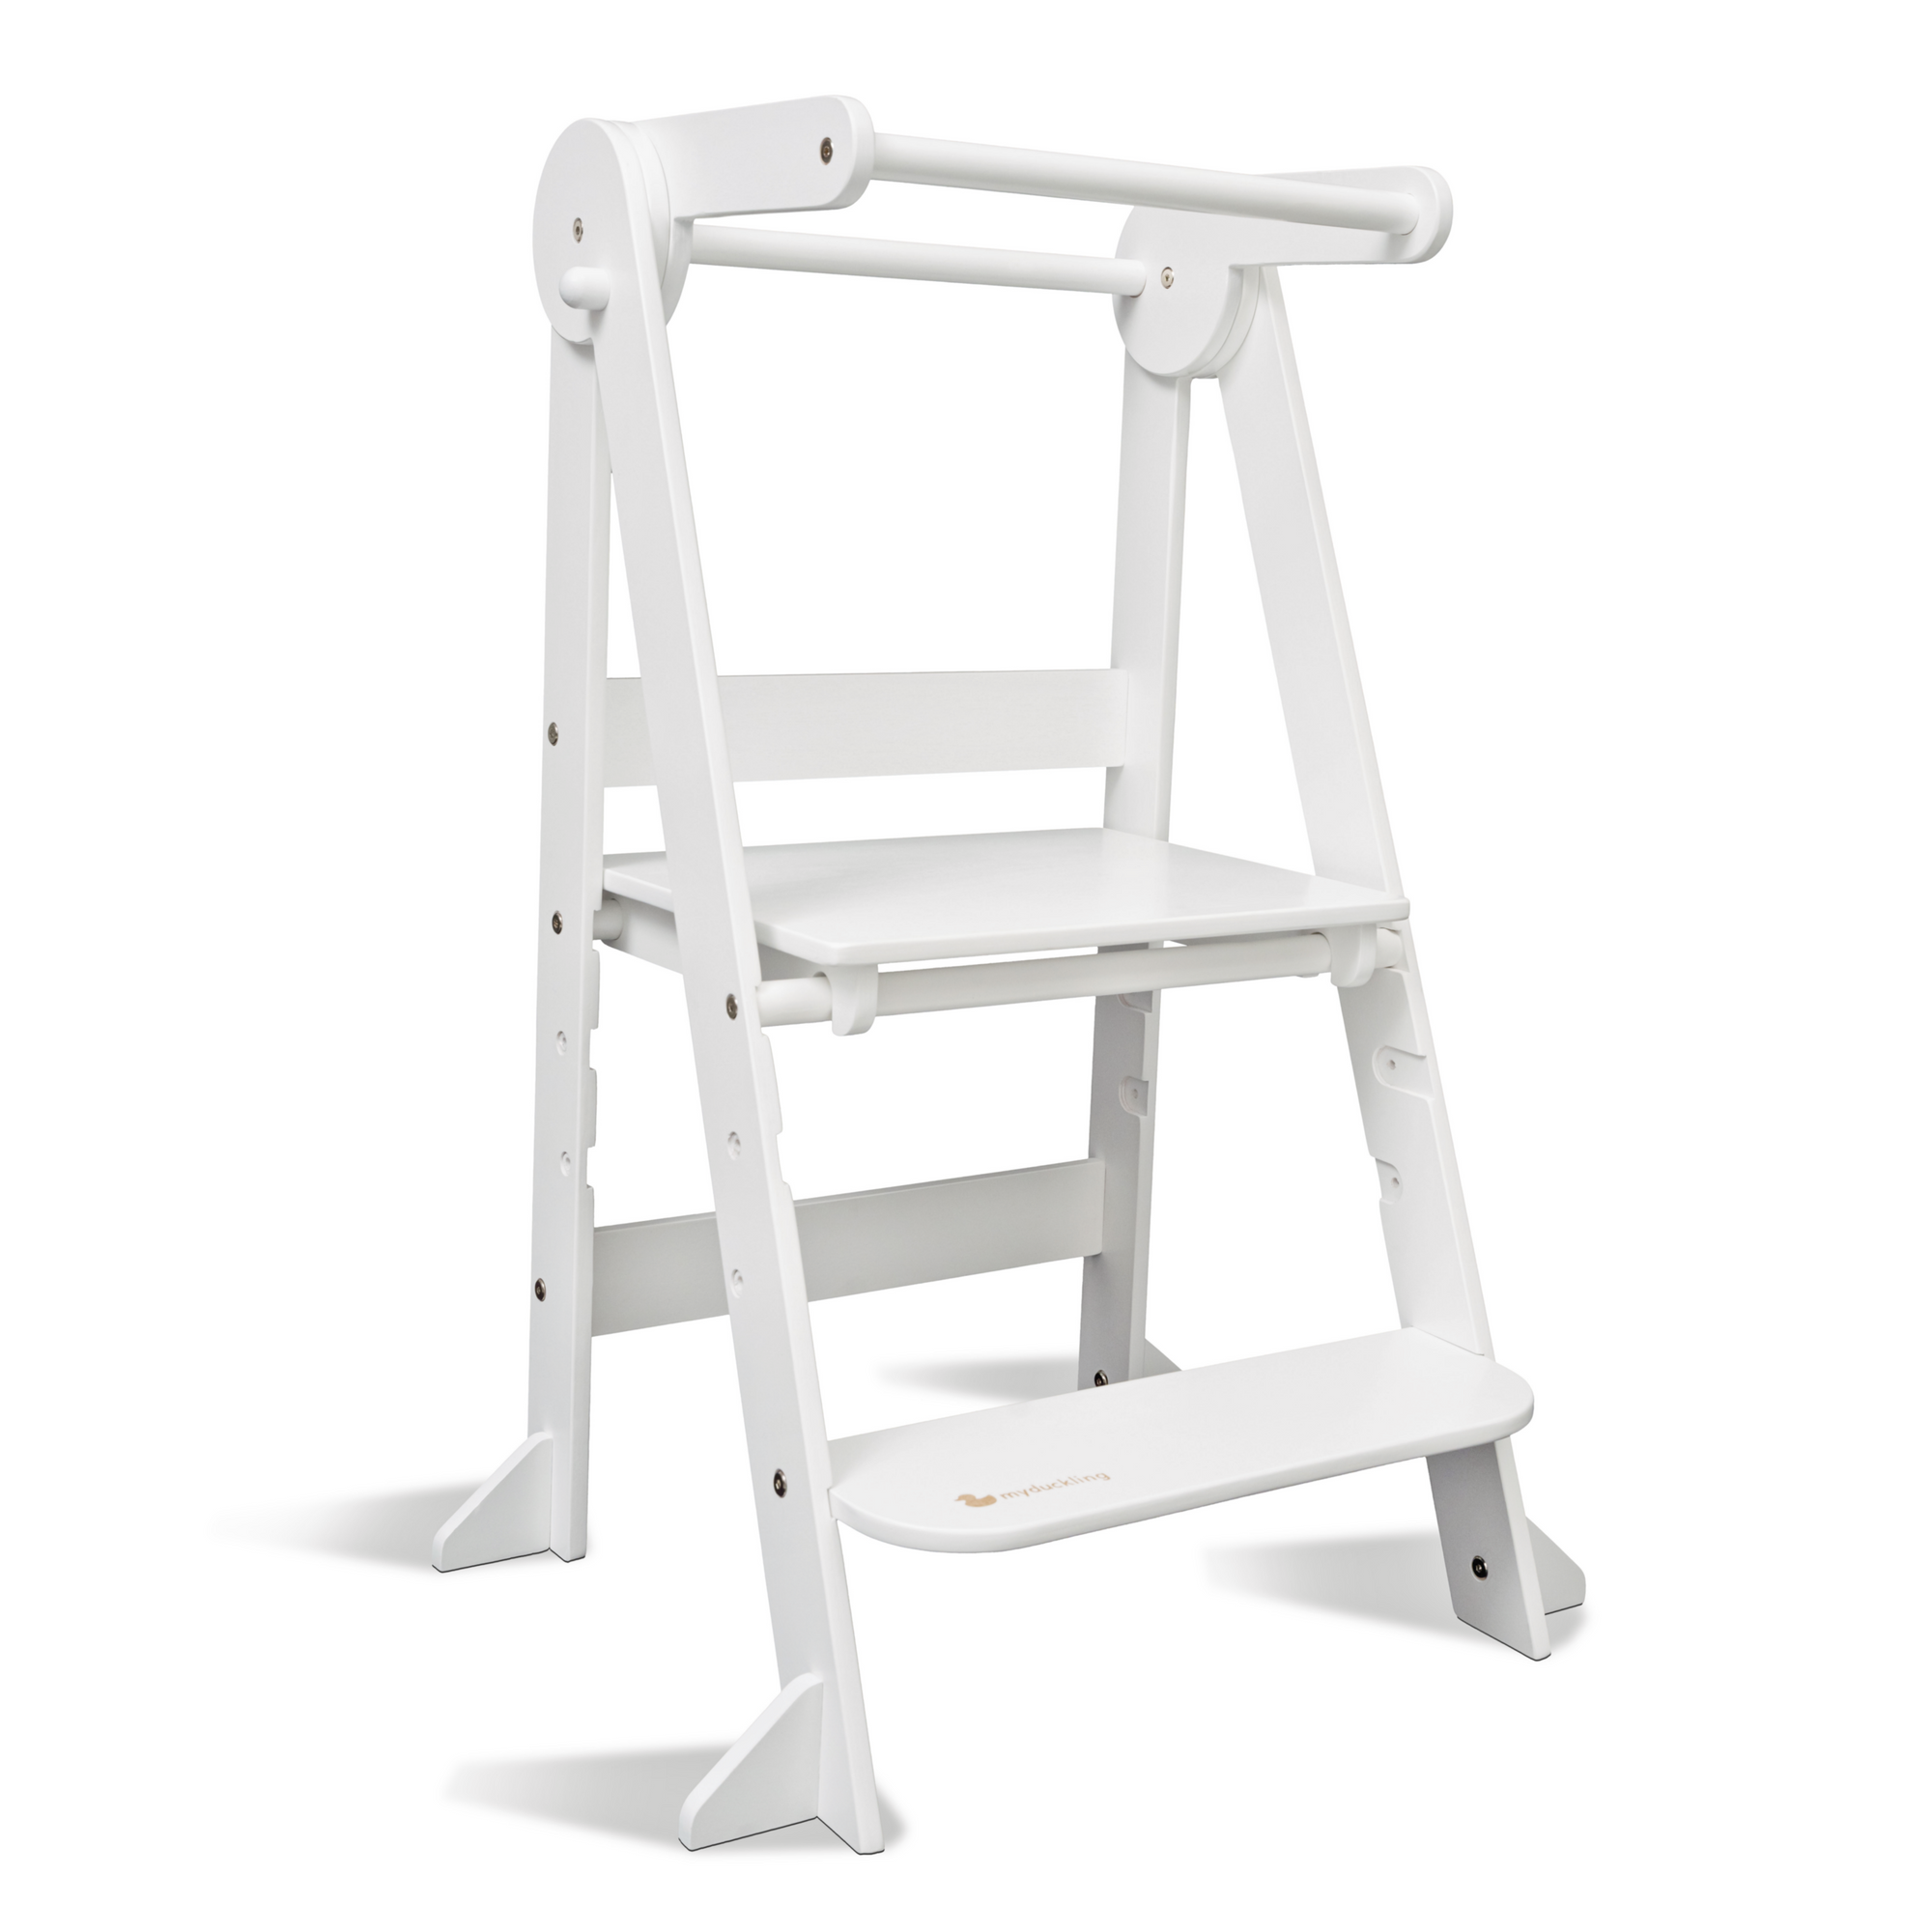 My Duckling MILA Deluxe Folding Adjustable Learning Tower - White